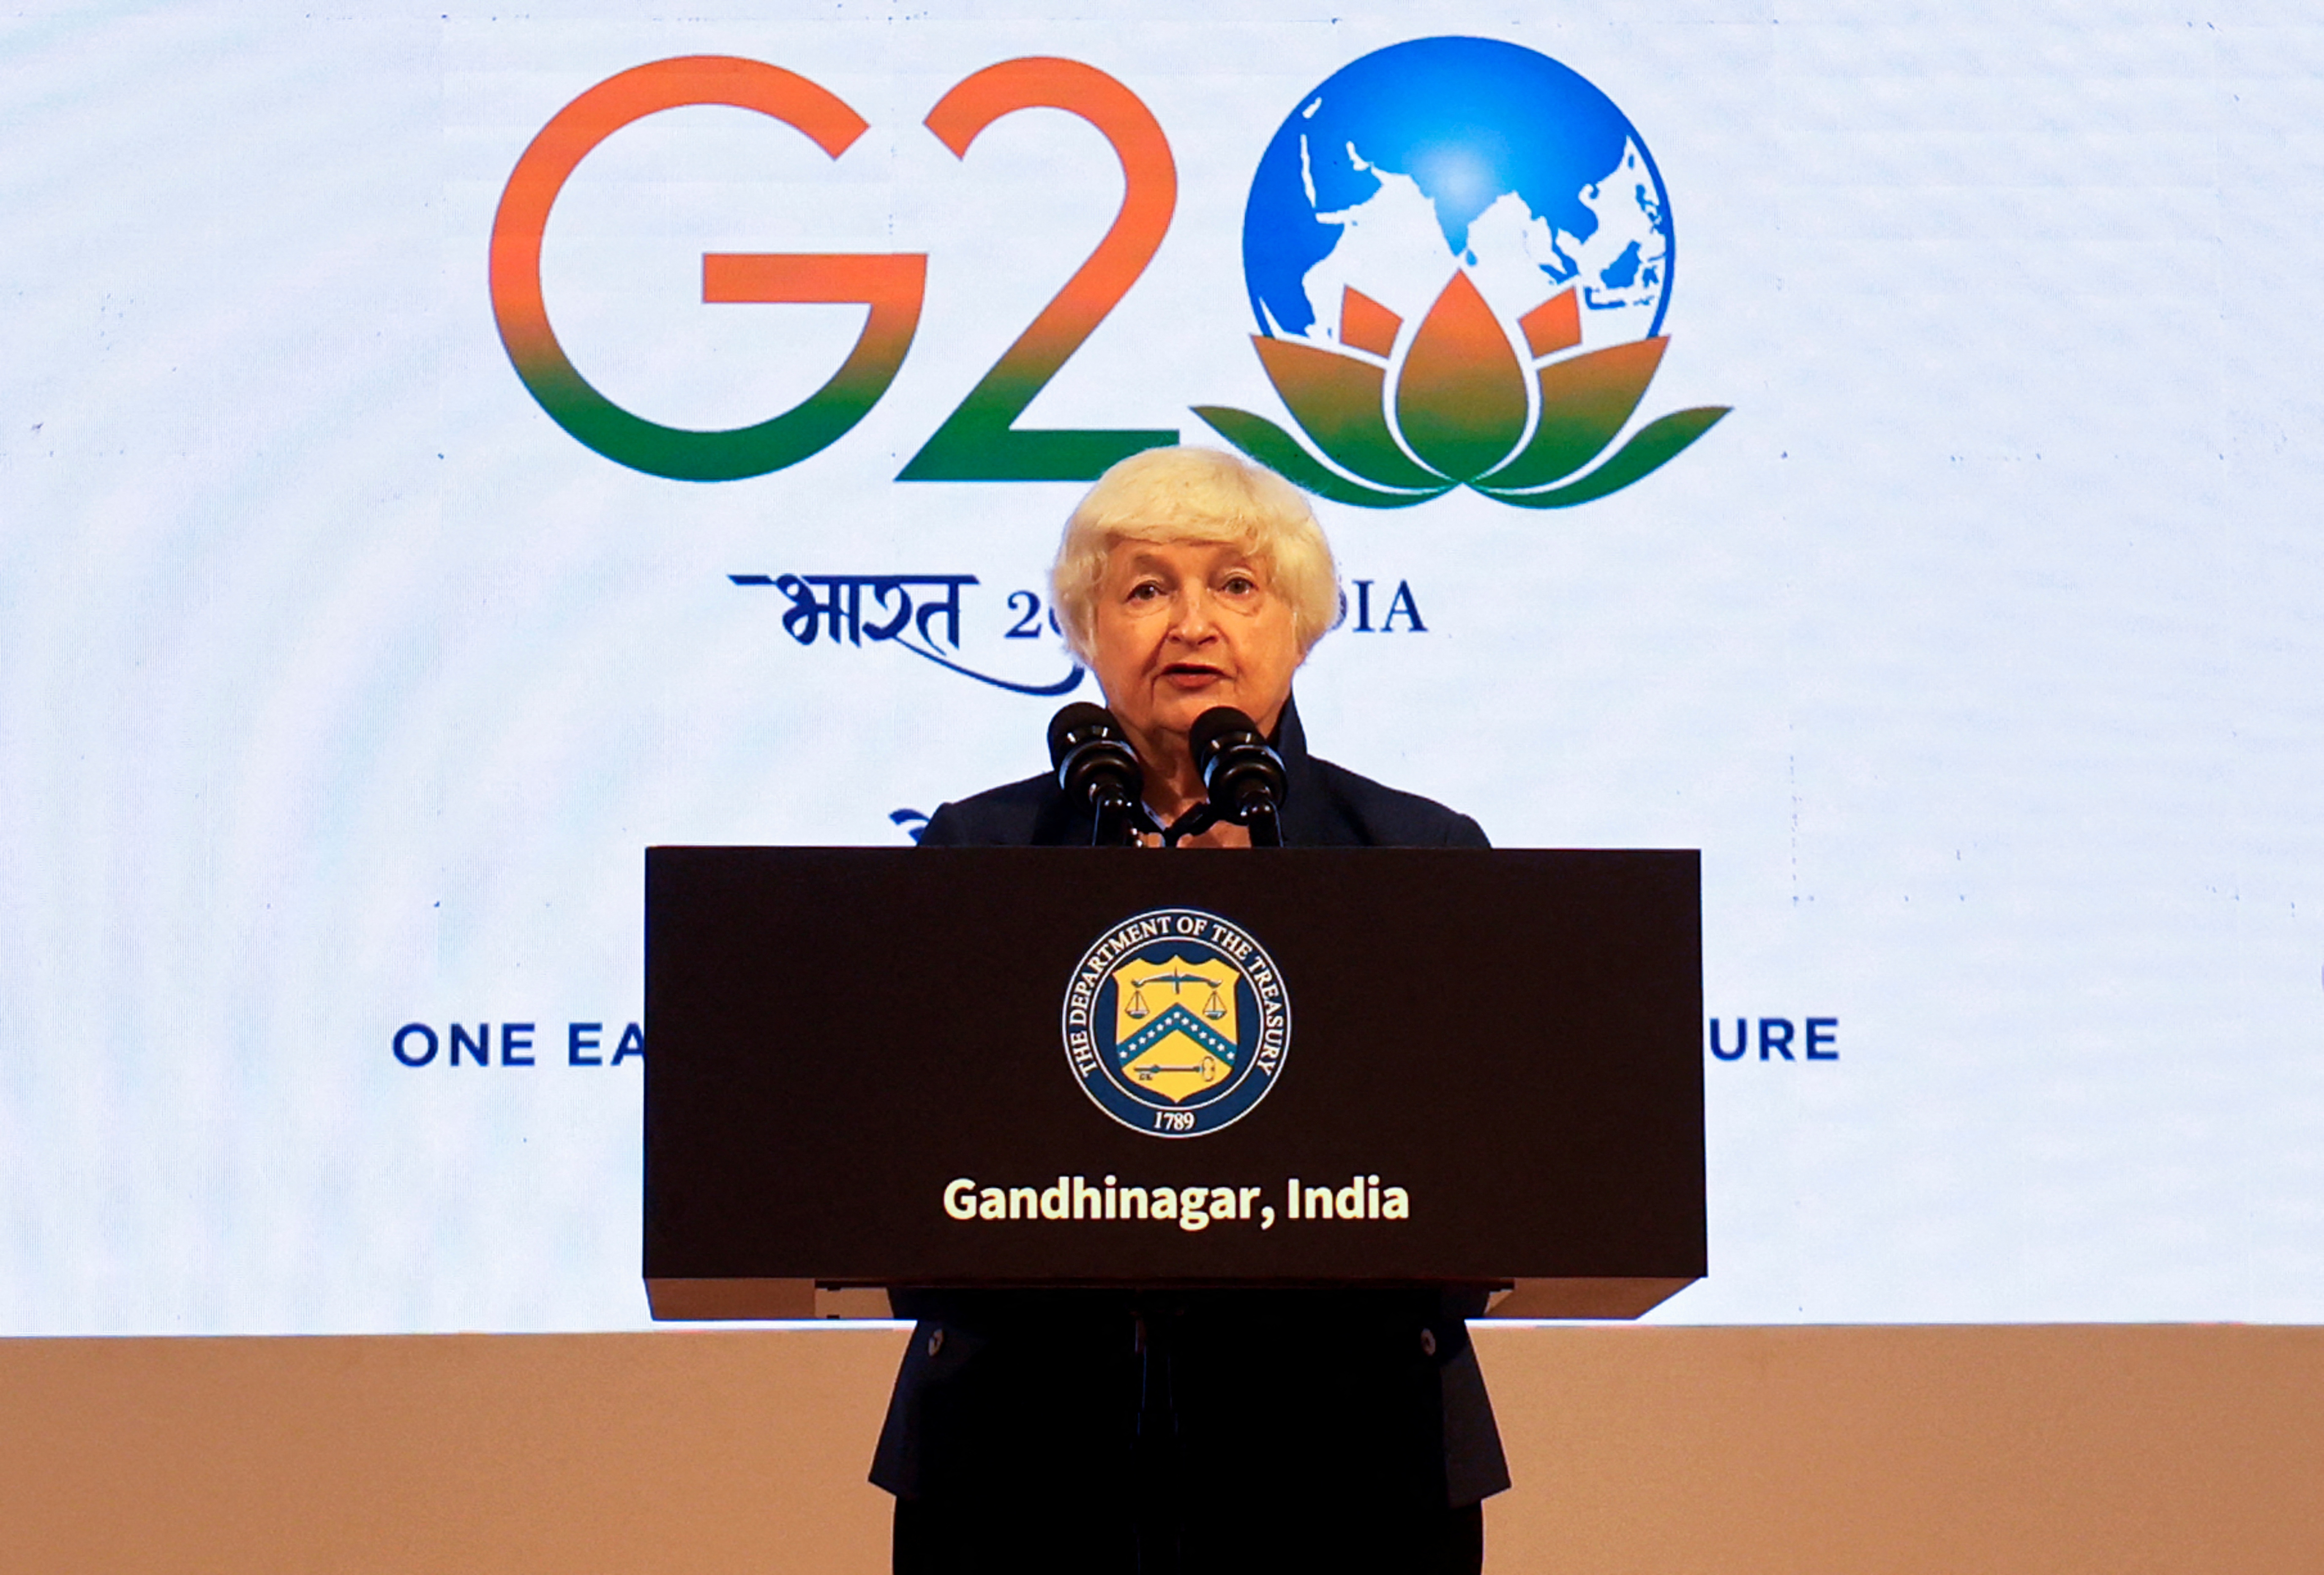 US Treasury Secretary Yellen addresses a news conference during a G20 finance ministers' and Central Bank governors' meeting at Gandhinagar